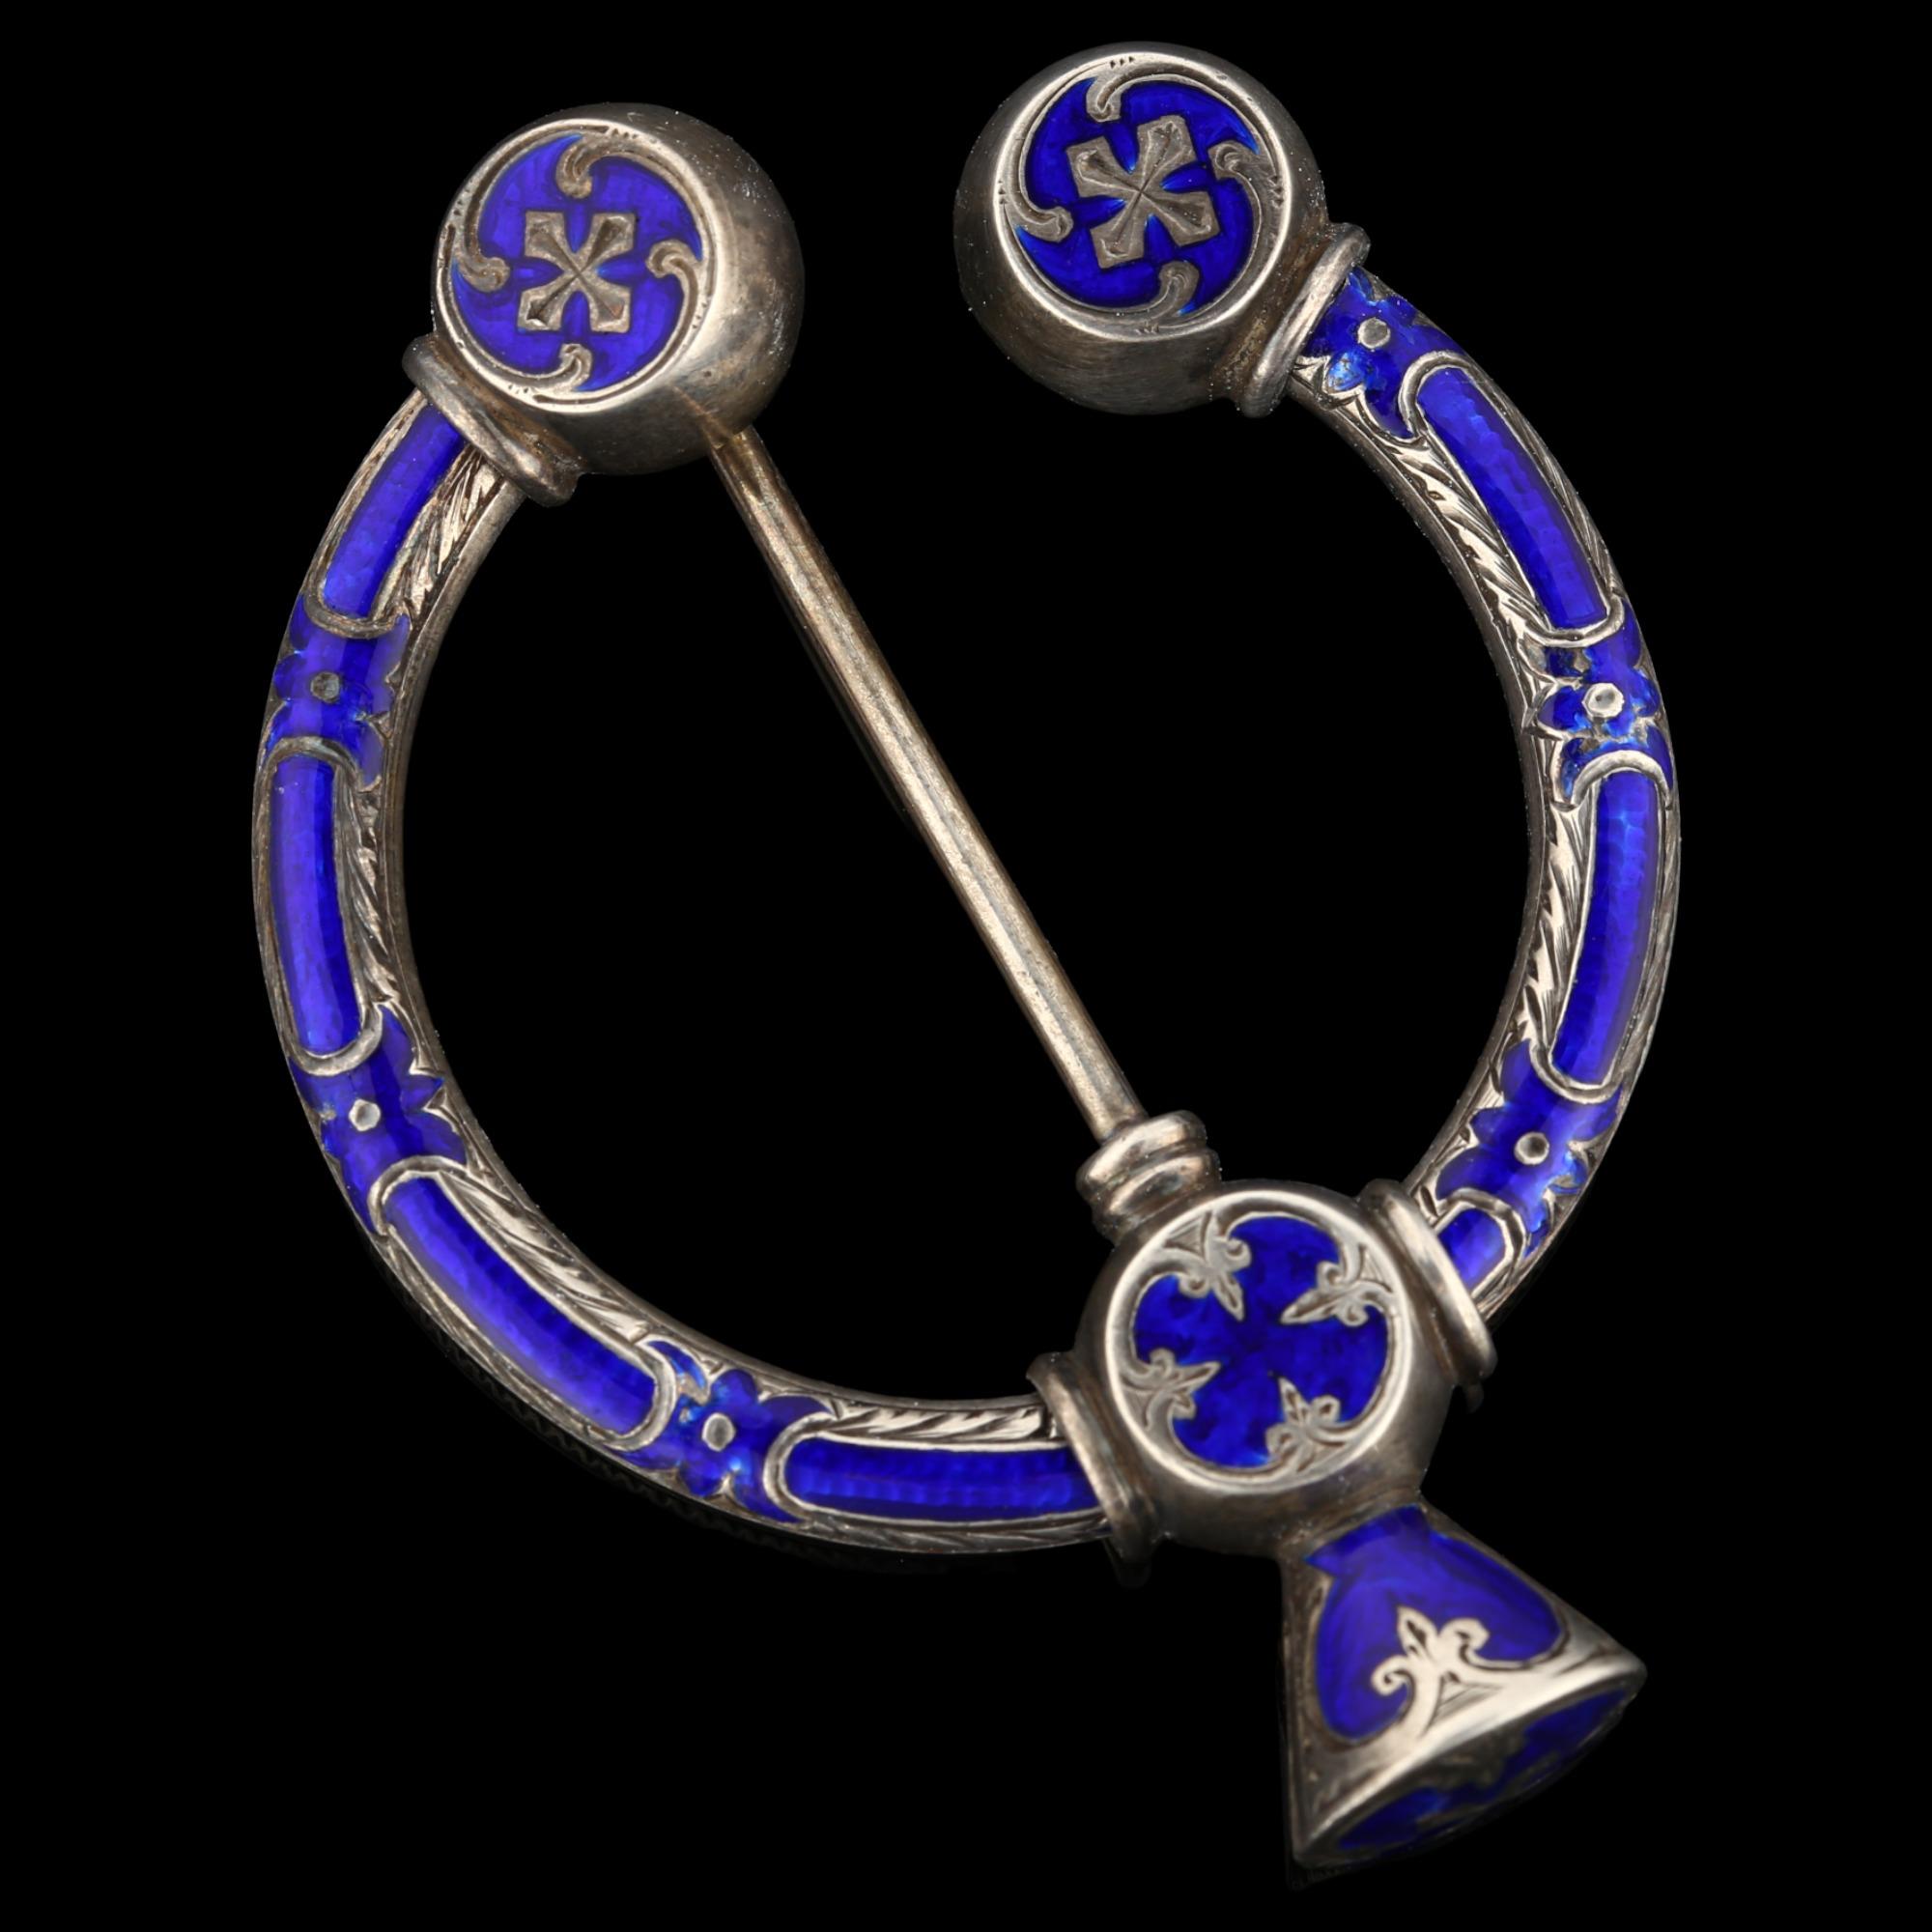 A 19th century Scottish Celtic blue enamel penannular brooch, unmarked silver settings with